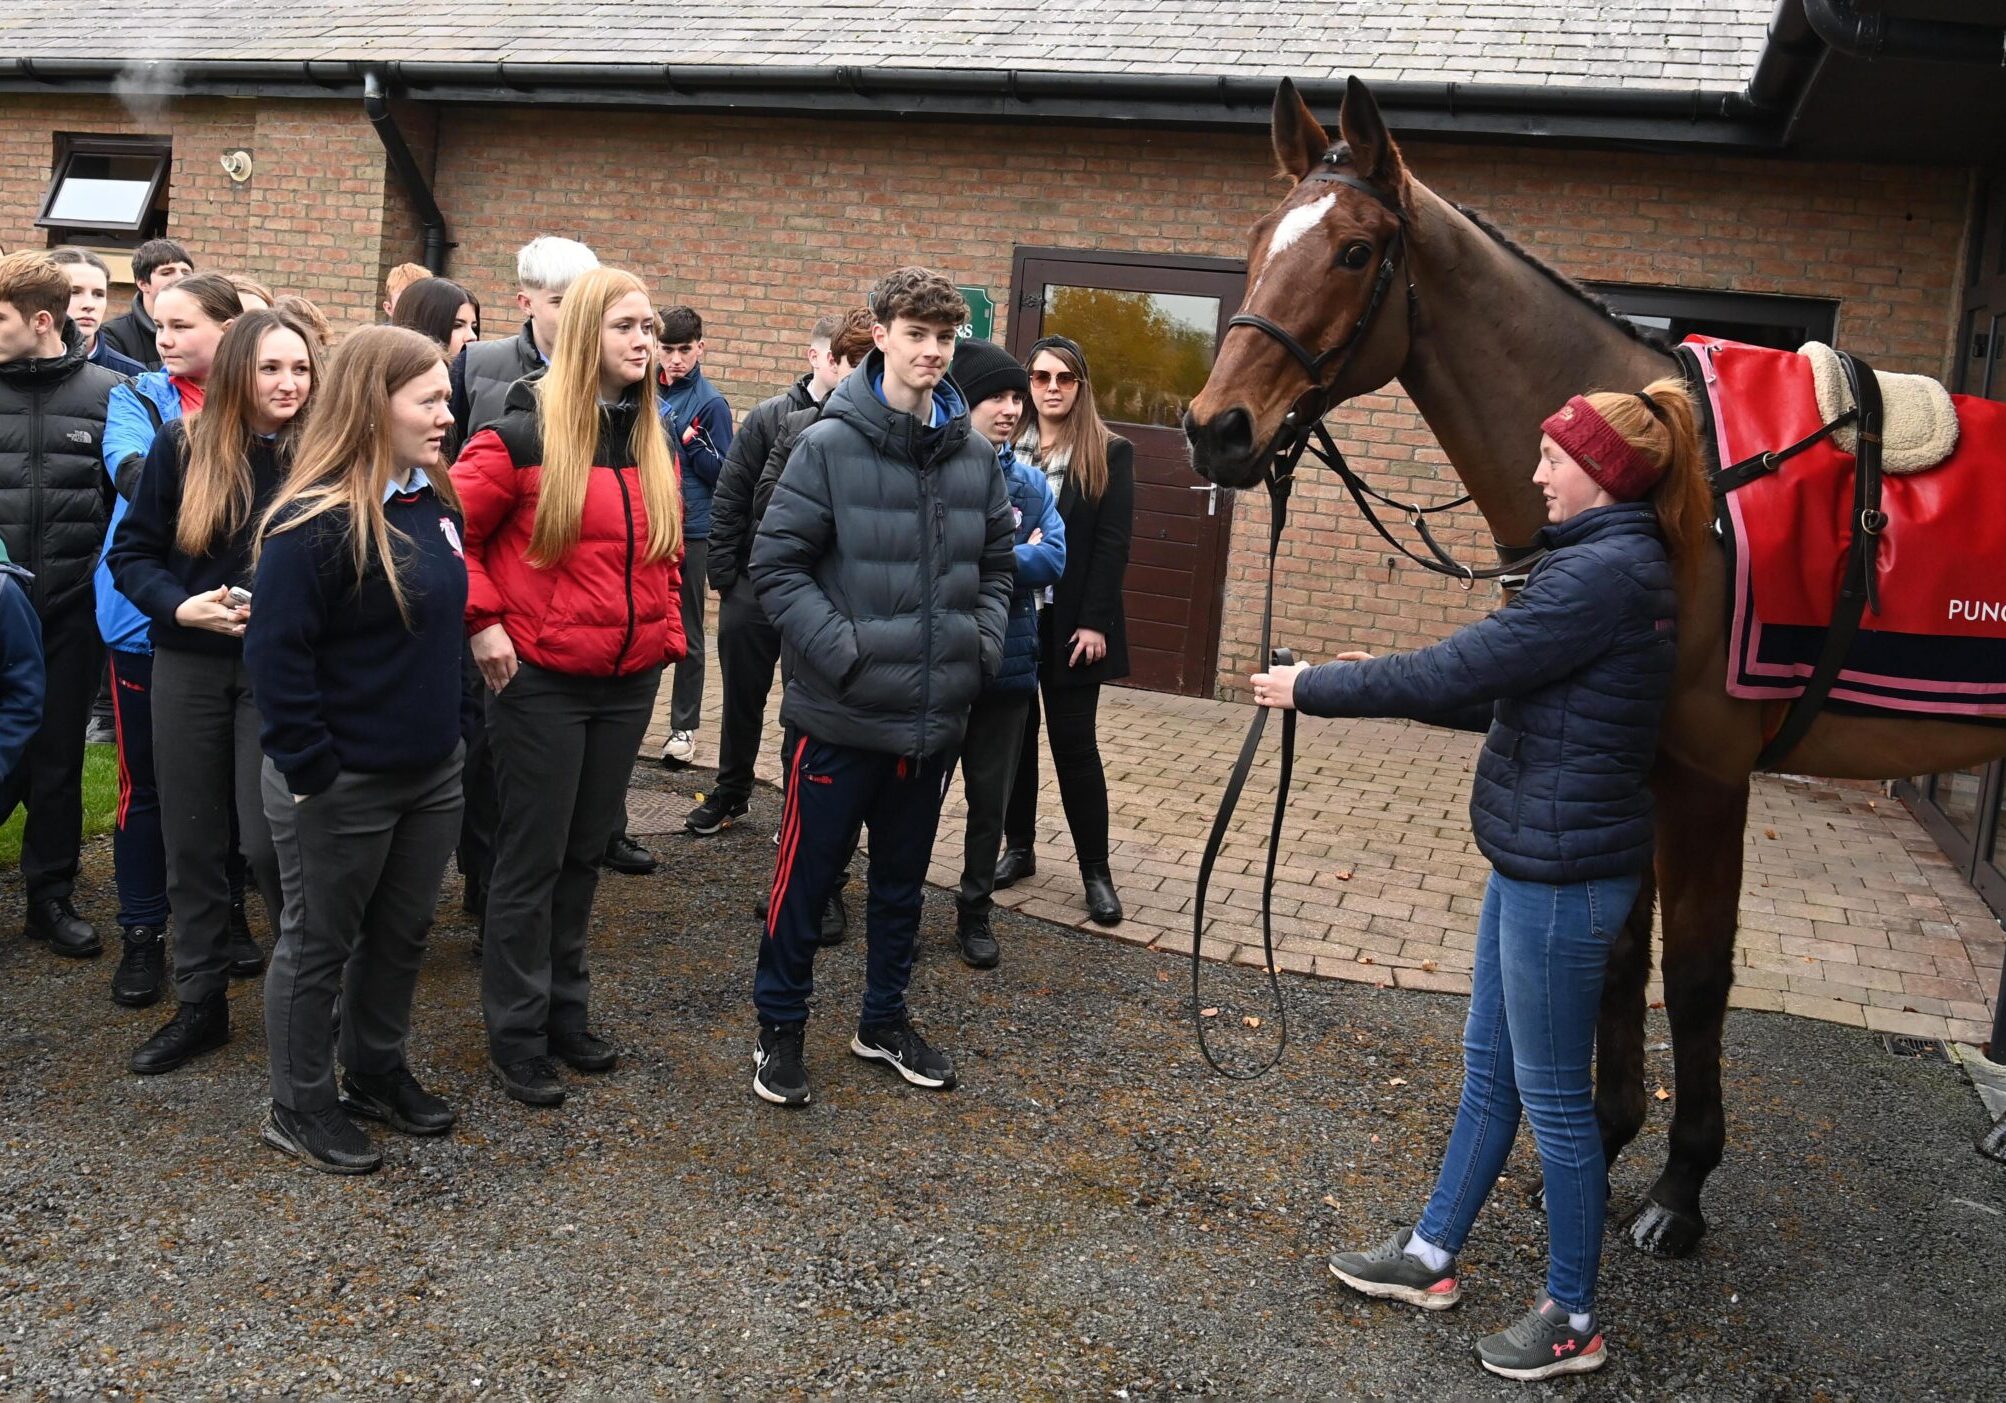 16-11-23 Punchestown.
Students from Columba College Killucan visited Punchestown as part of the prize for classmate Ruth Shanley winning the 2023 From Foal To Race transition year (TY) programme with a poem of the same title.
Healy Racing Photo